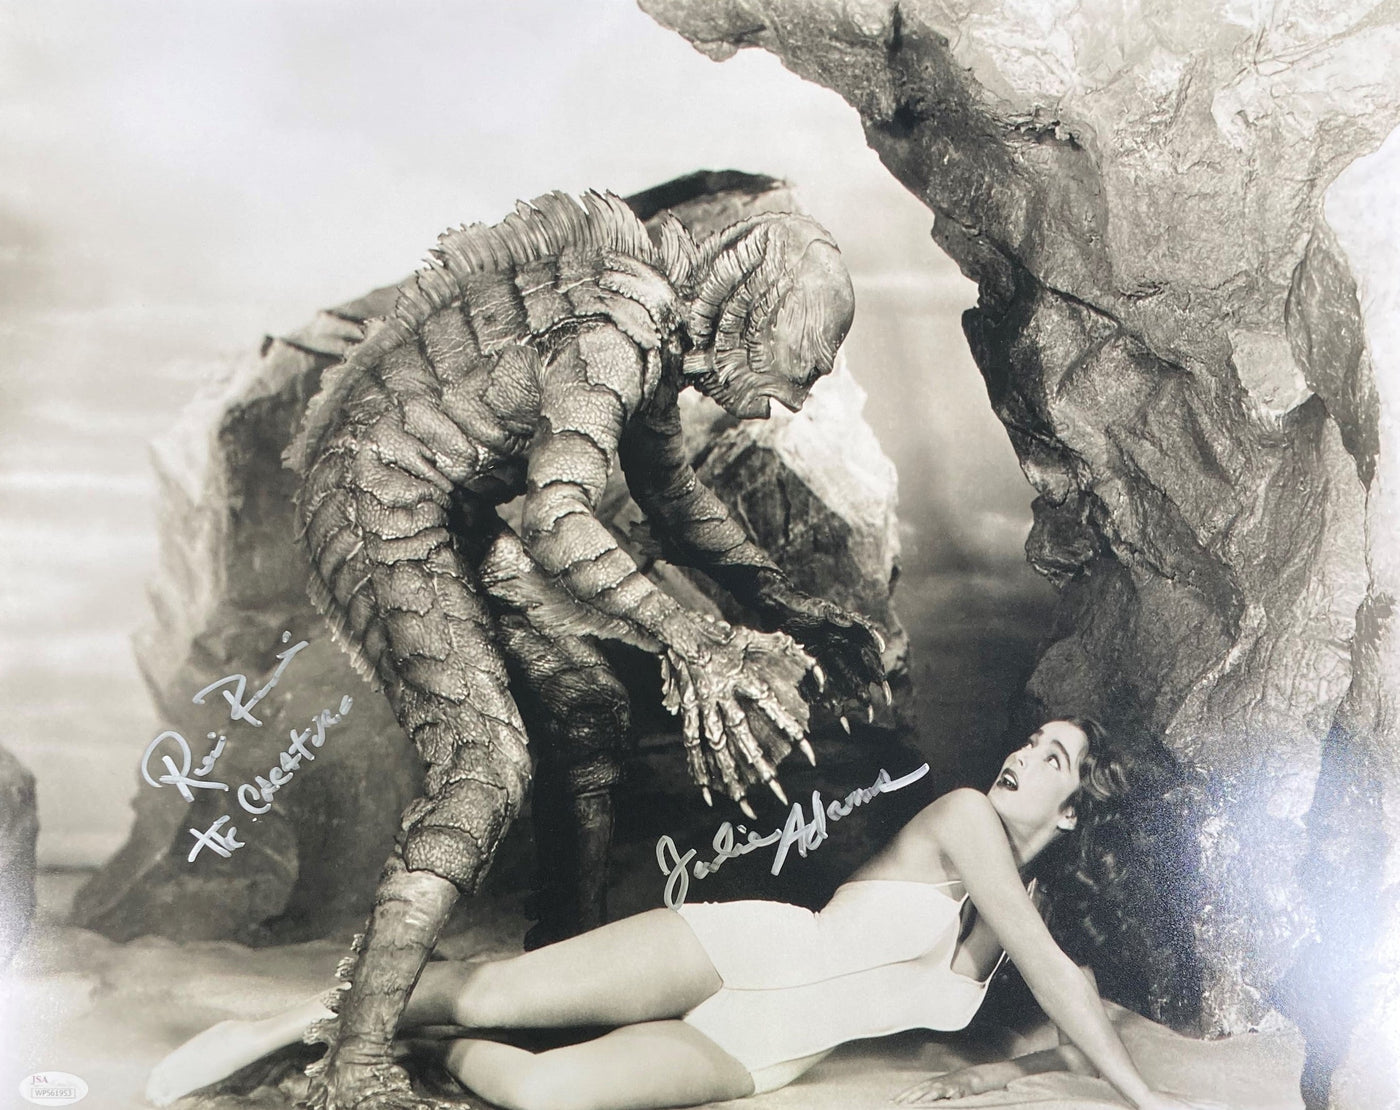 Ricou Browning & Julie Adams Signed 16x20 Photo Creature from the Black Lagoon JSA 3